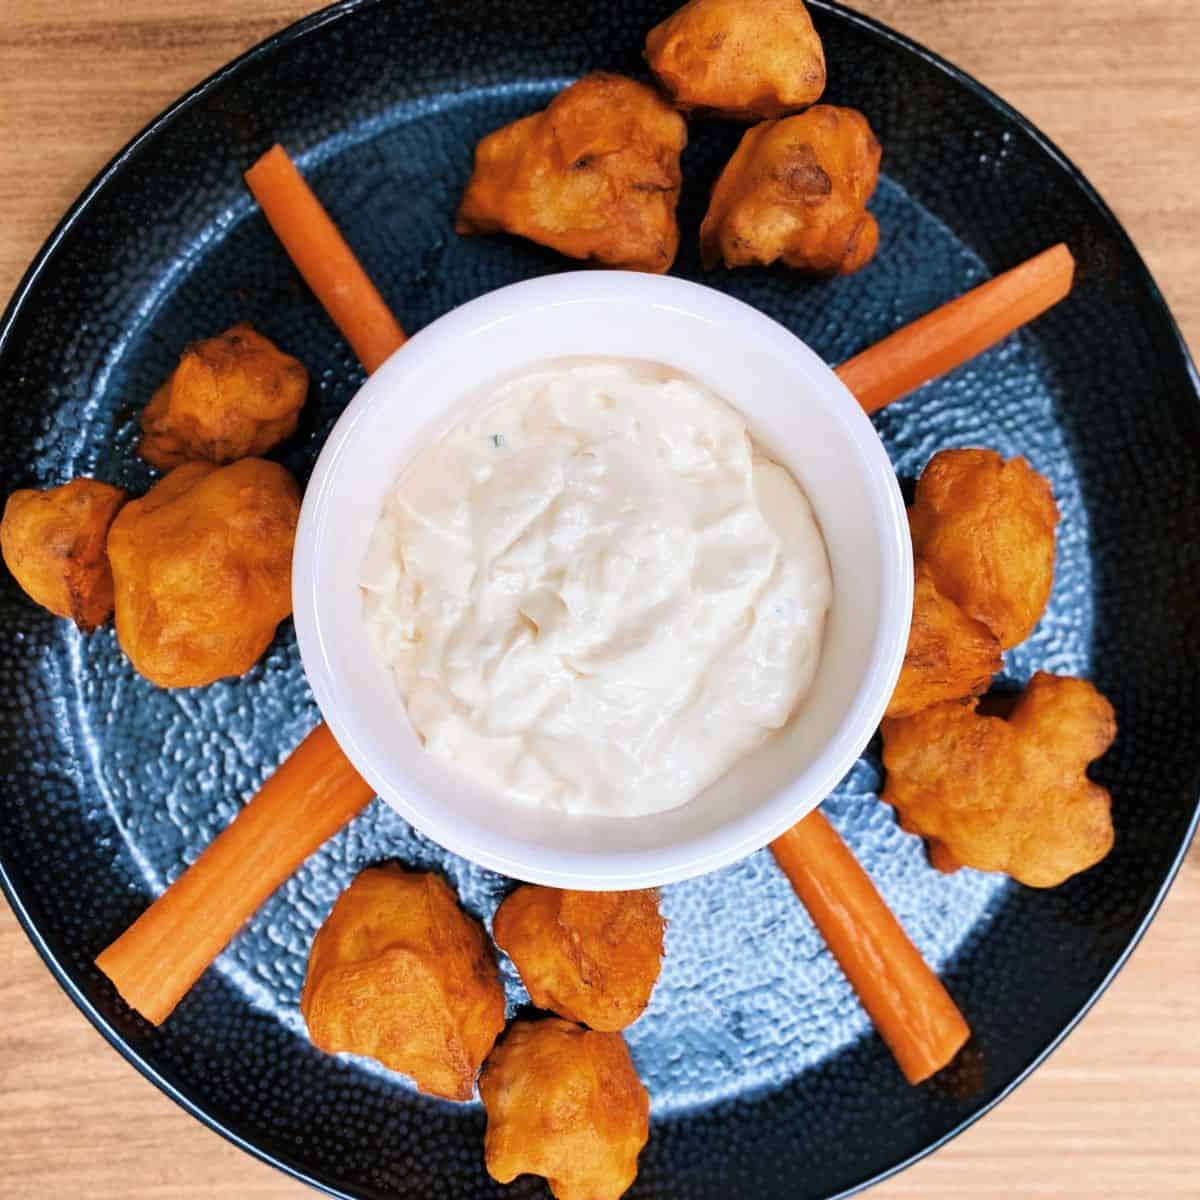 cauliflower bites on a plate with ranch dip and. carrots